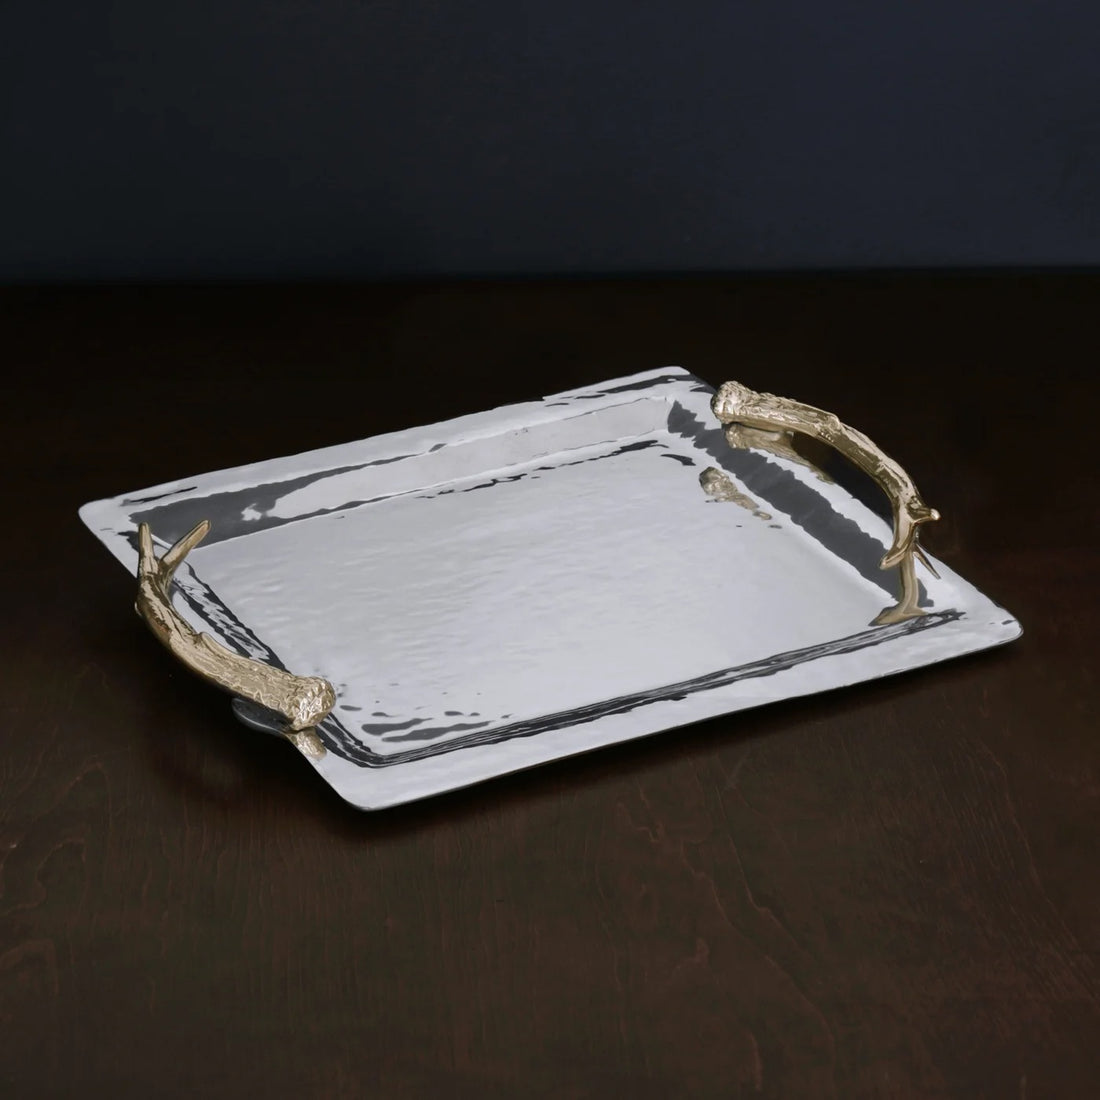 WESTERN Antler Emerson Large Tray with Gold Handles